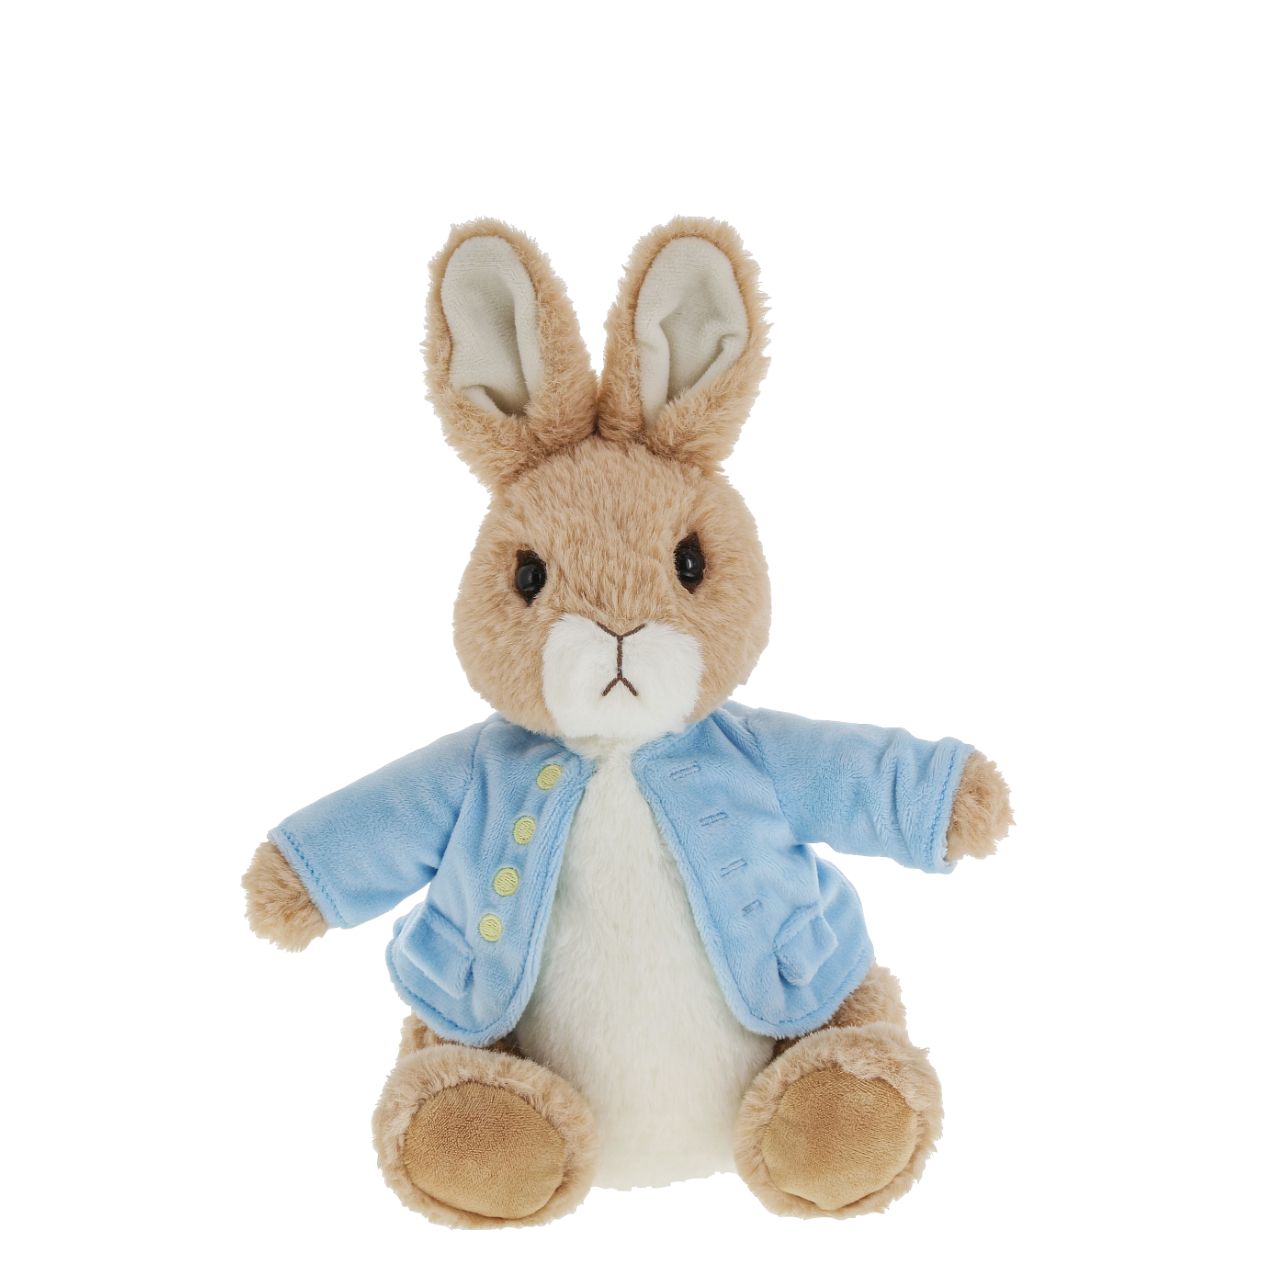 Beatrix Potter Peter Rabbit Large  This Peter Rabbit soft toy is made from beautifully soft fabric and is dressed in clothing exactly as illustrated by Beatrix Potter, with his signature blue jacket. The Peter Rabbit collection features the much loved characters from the Beatrix Potter books and this quality and authentic soft toy is sure to be adored for many years to come.